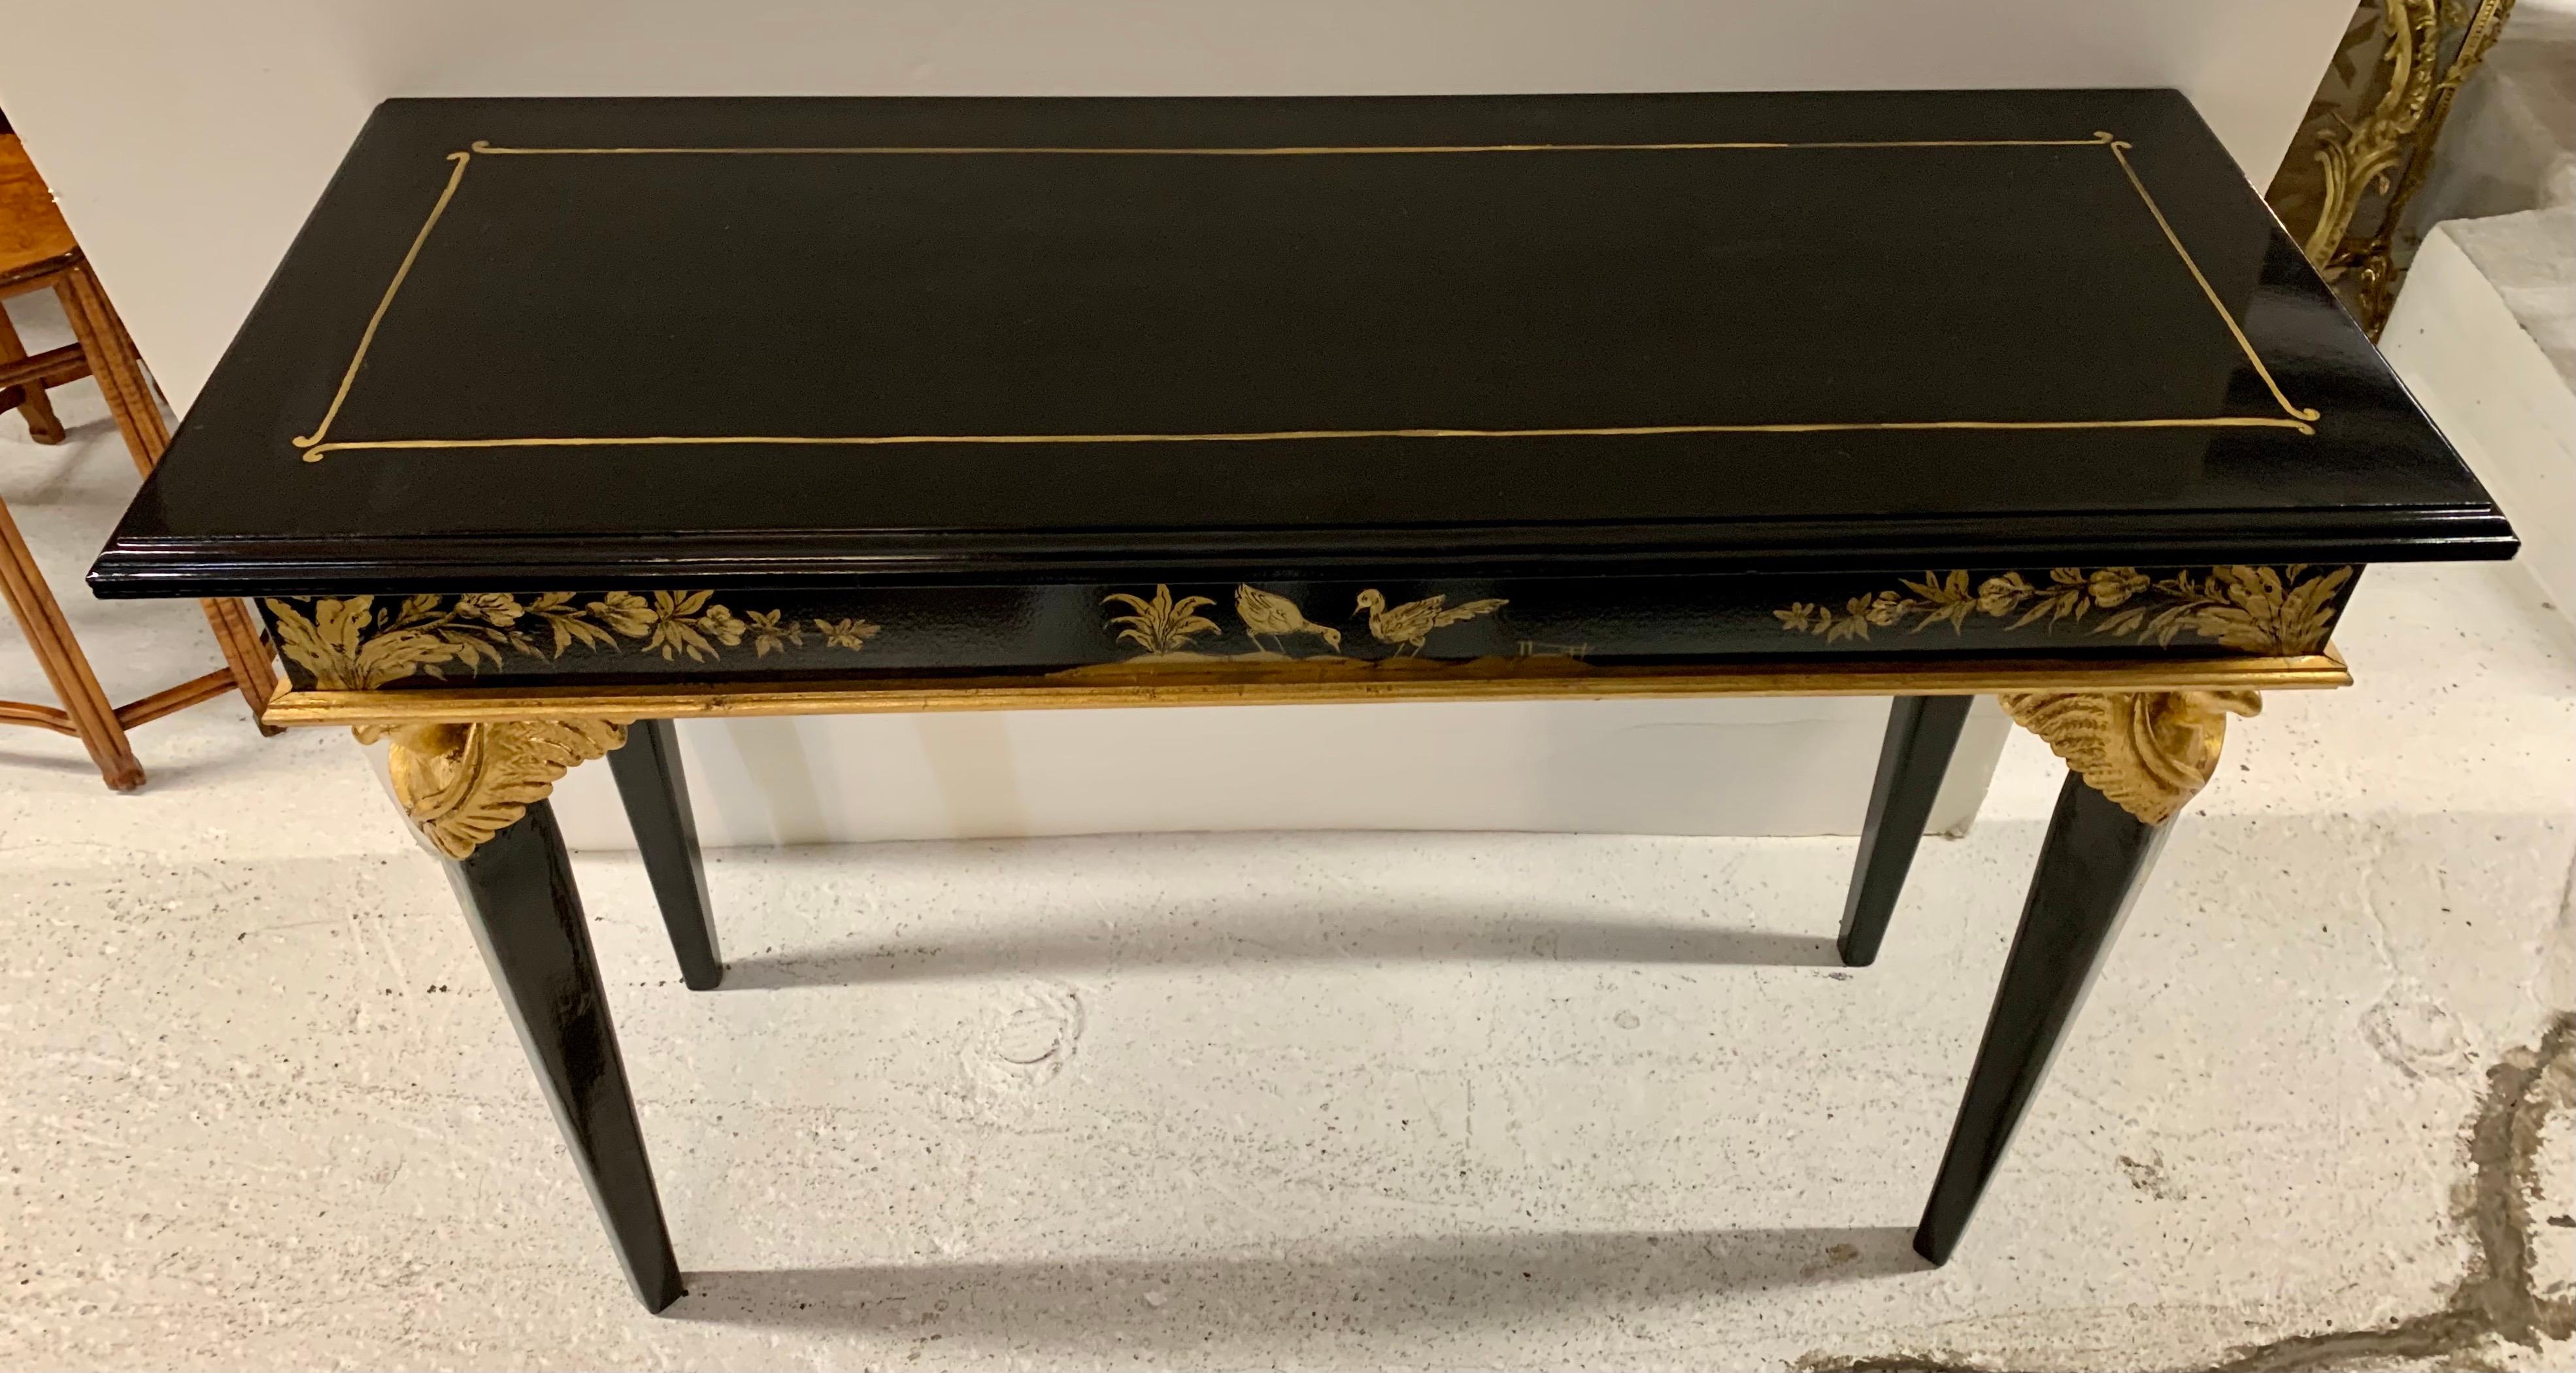 Stunning Italian Rococo neoclassical style black lacquered and gold painted console table that features birds prominently. Please see all pictures in the suite attached. Not to be missed. Now, more than ever, home is where the heart is.